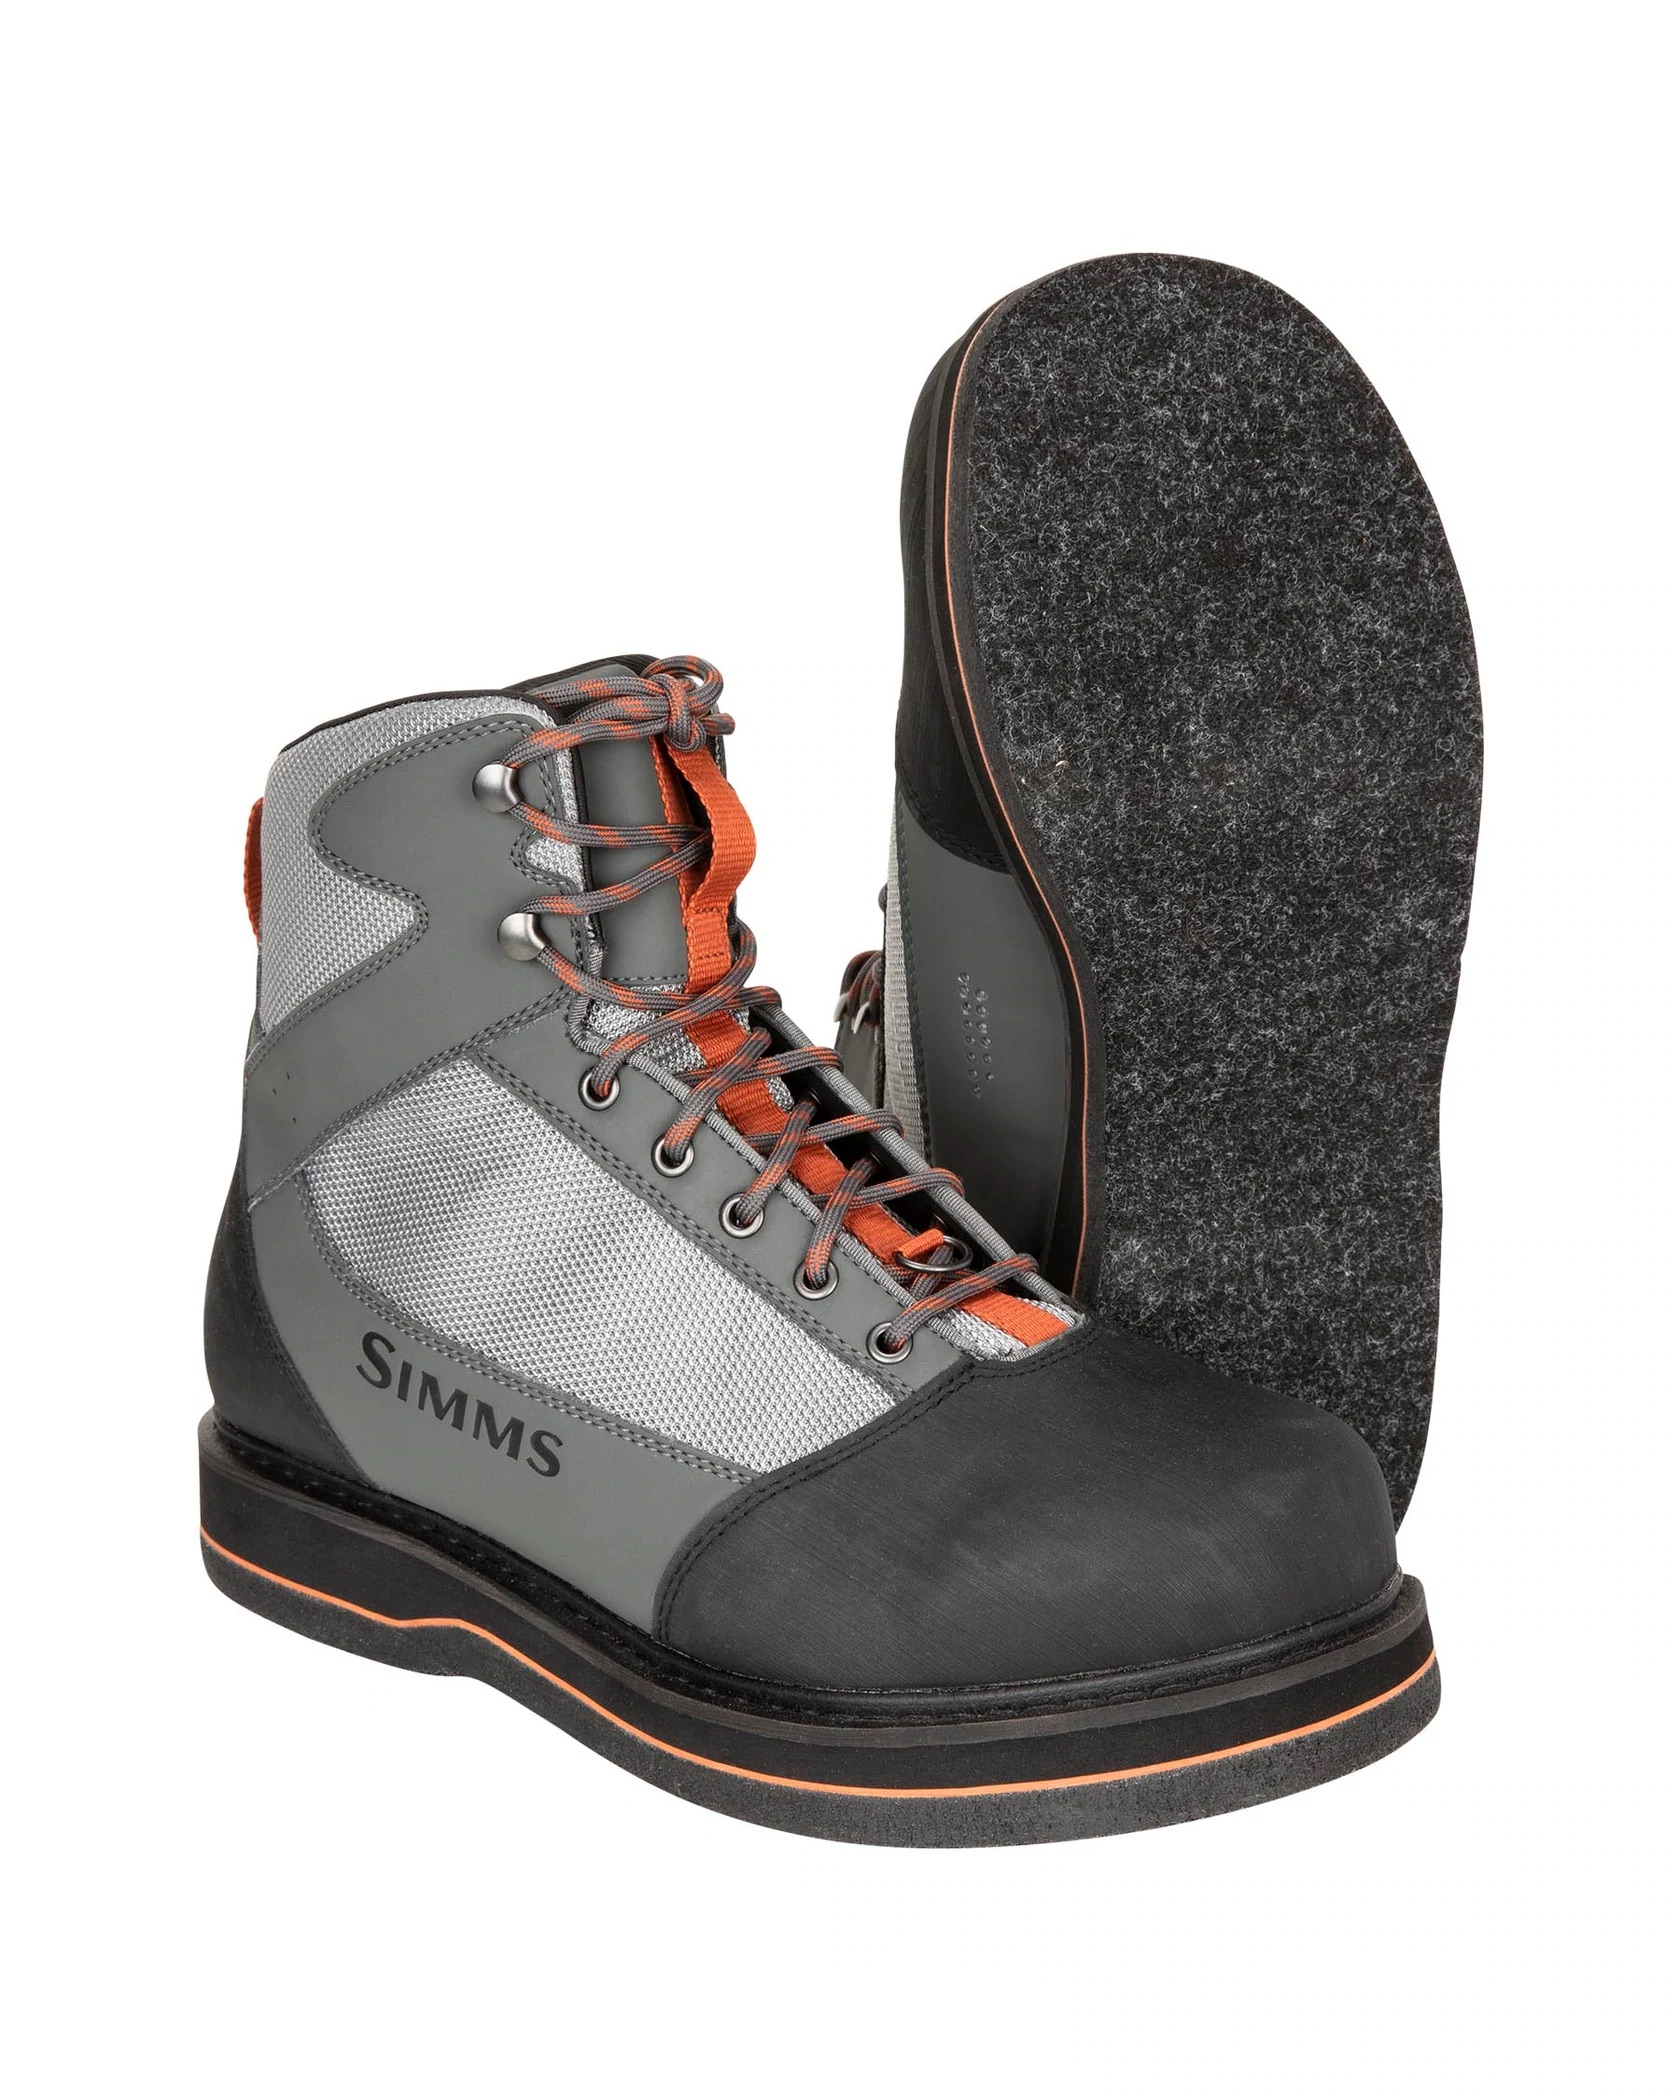 Simms Tributary Boot - Felt - Size 4